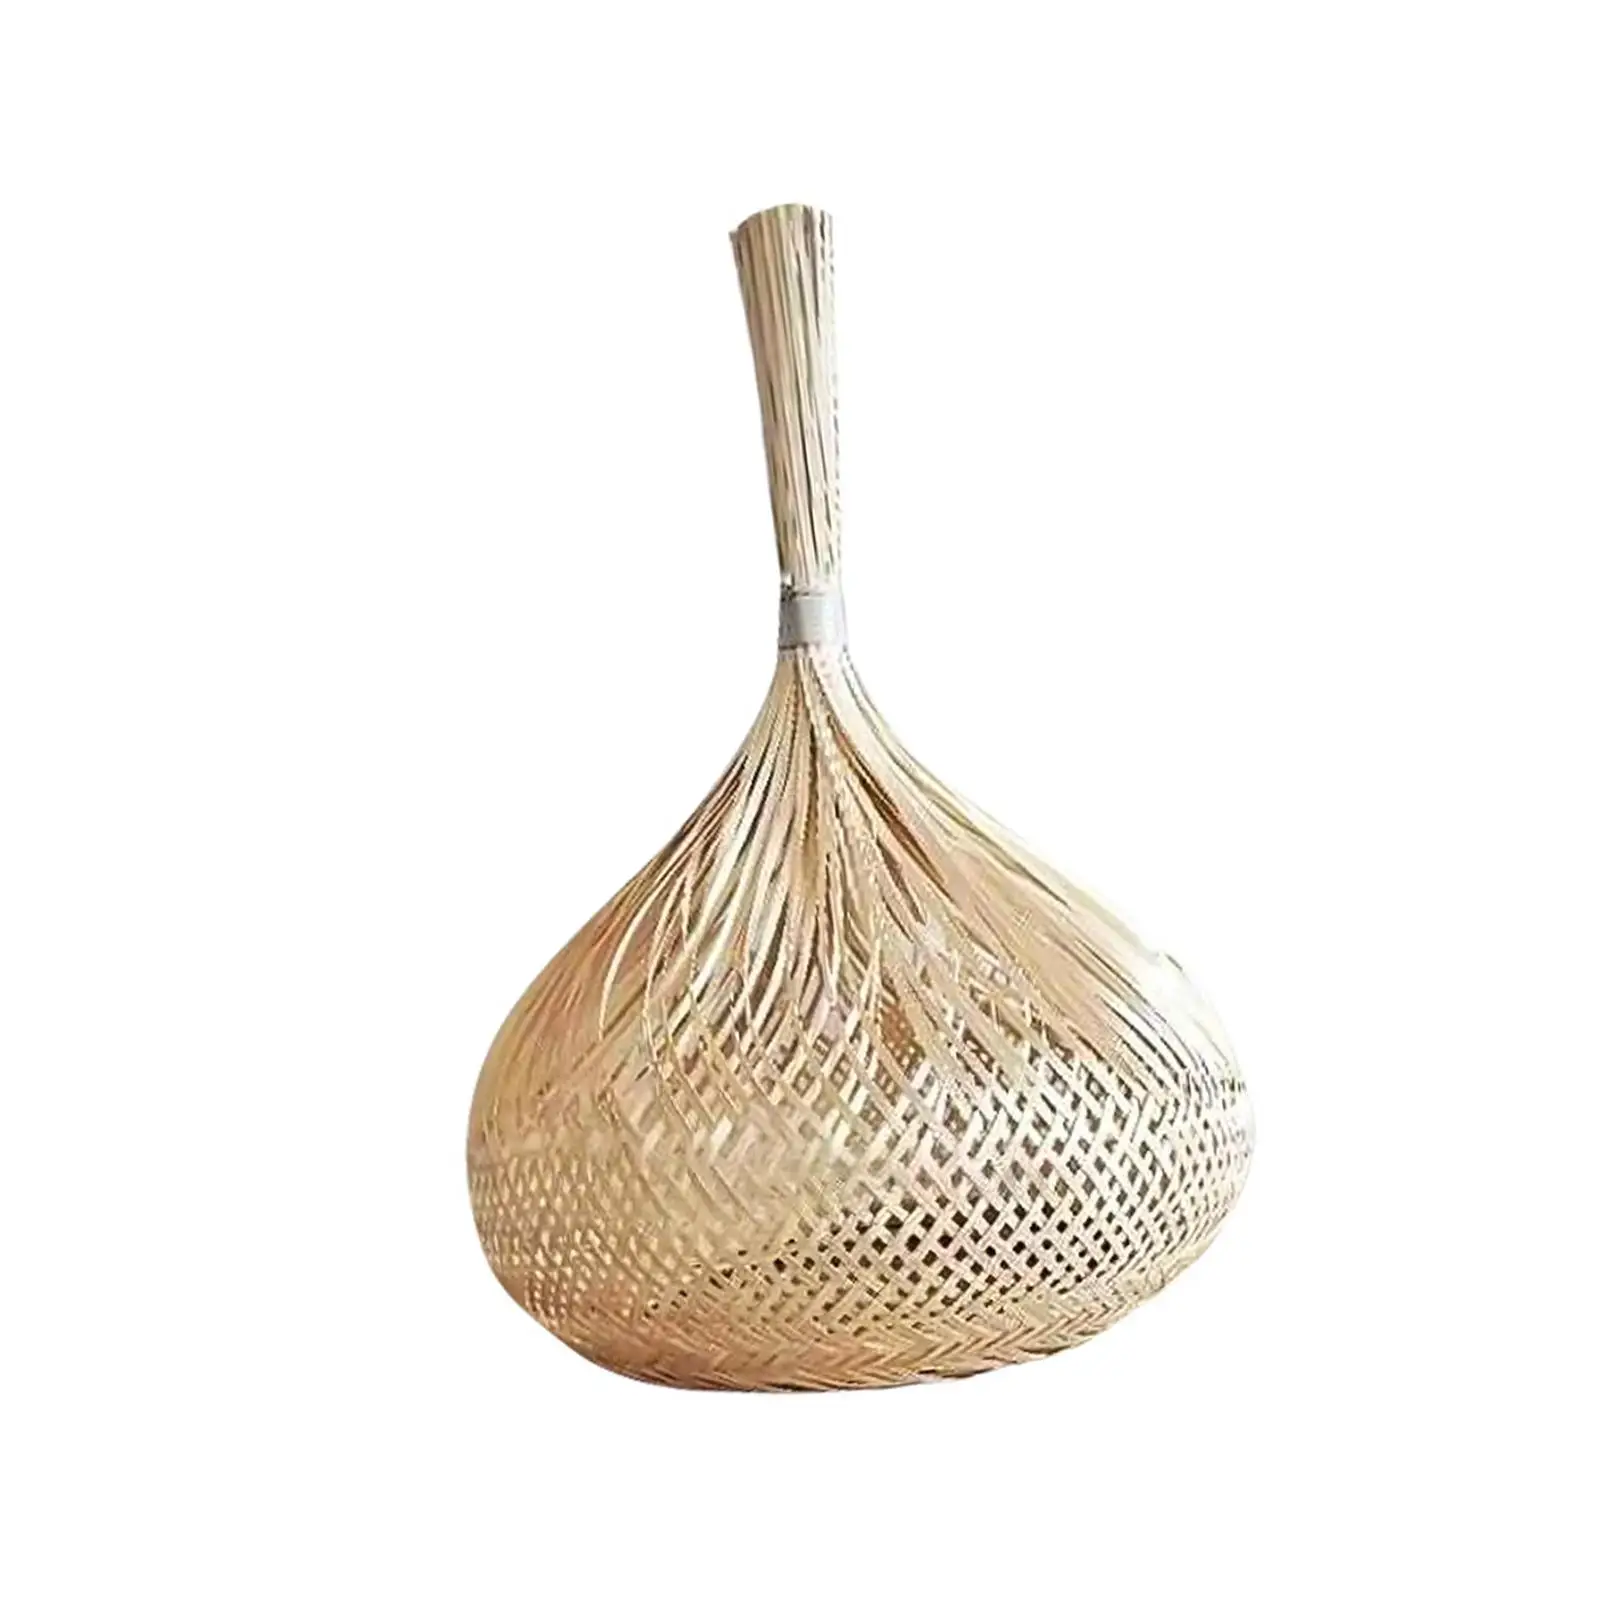 Bamboo Woven Lampshade Handwoven Chandelier Cover for Kitchen Teahouse Hotel